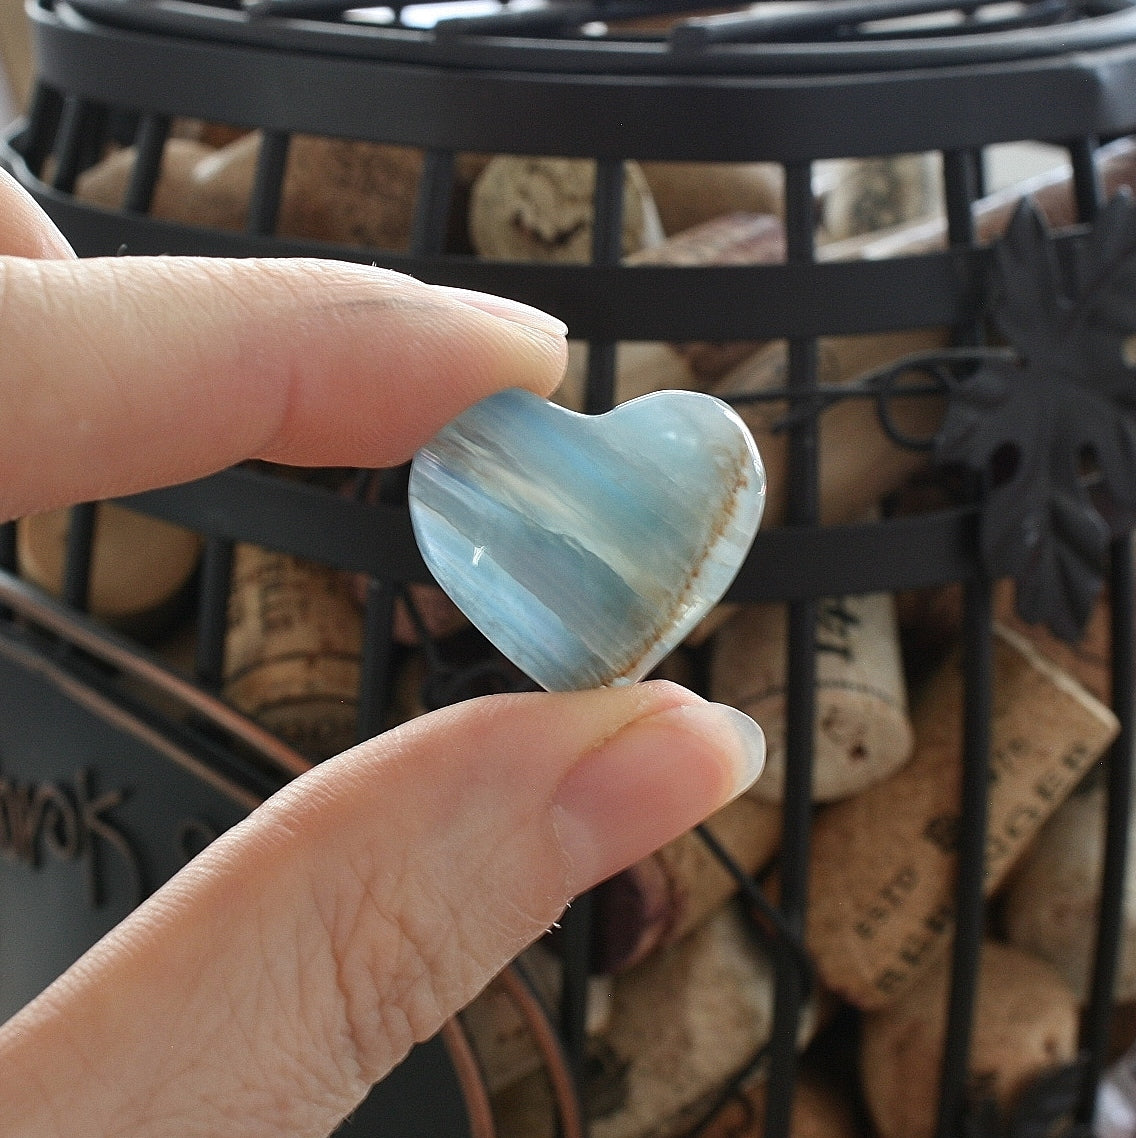 Blue Calcite Heart from Argentina, also called Blue Onyx or Lemurian Aquatine Calcite